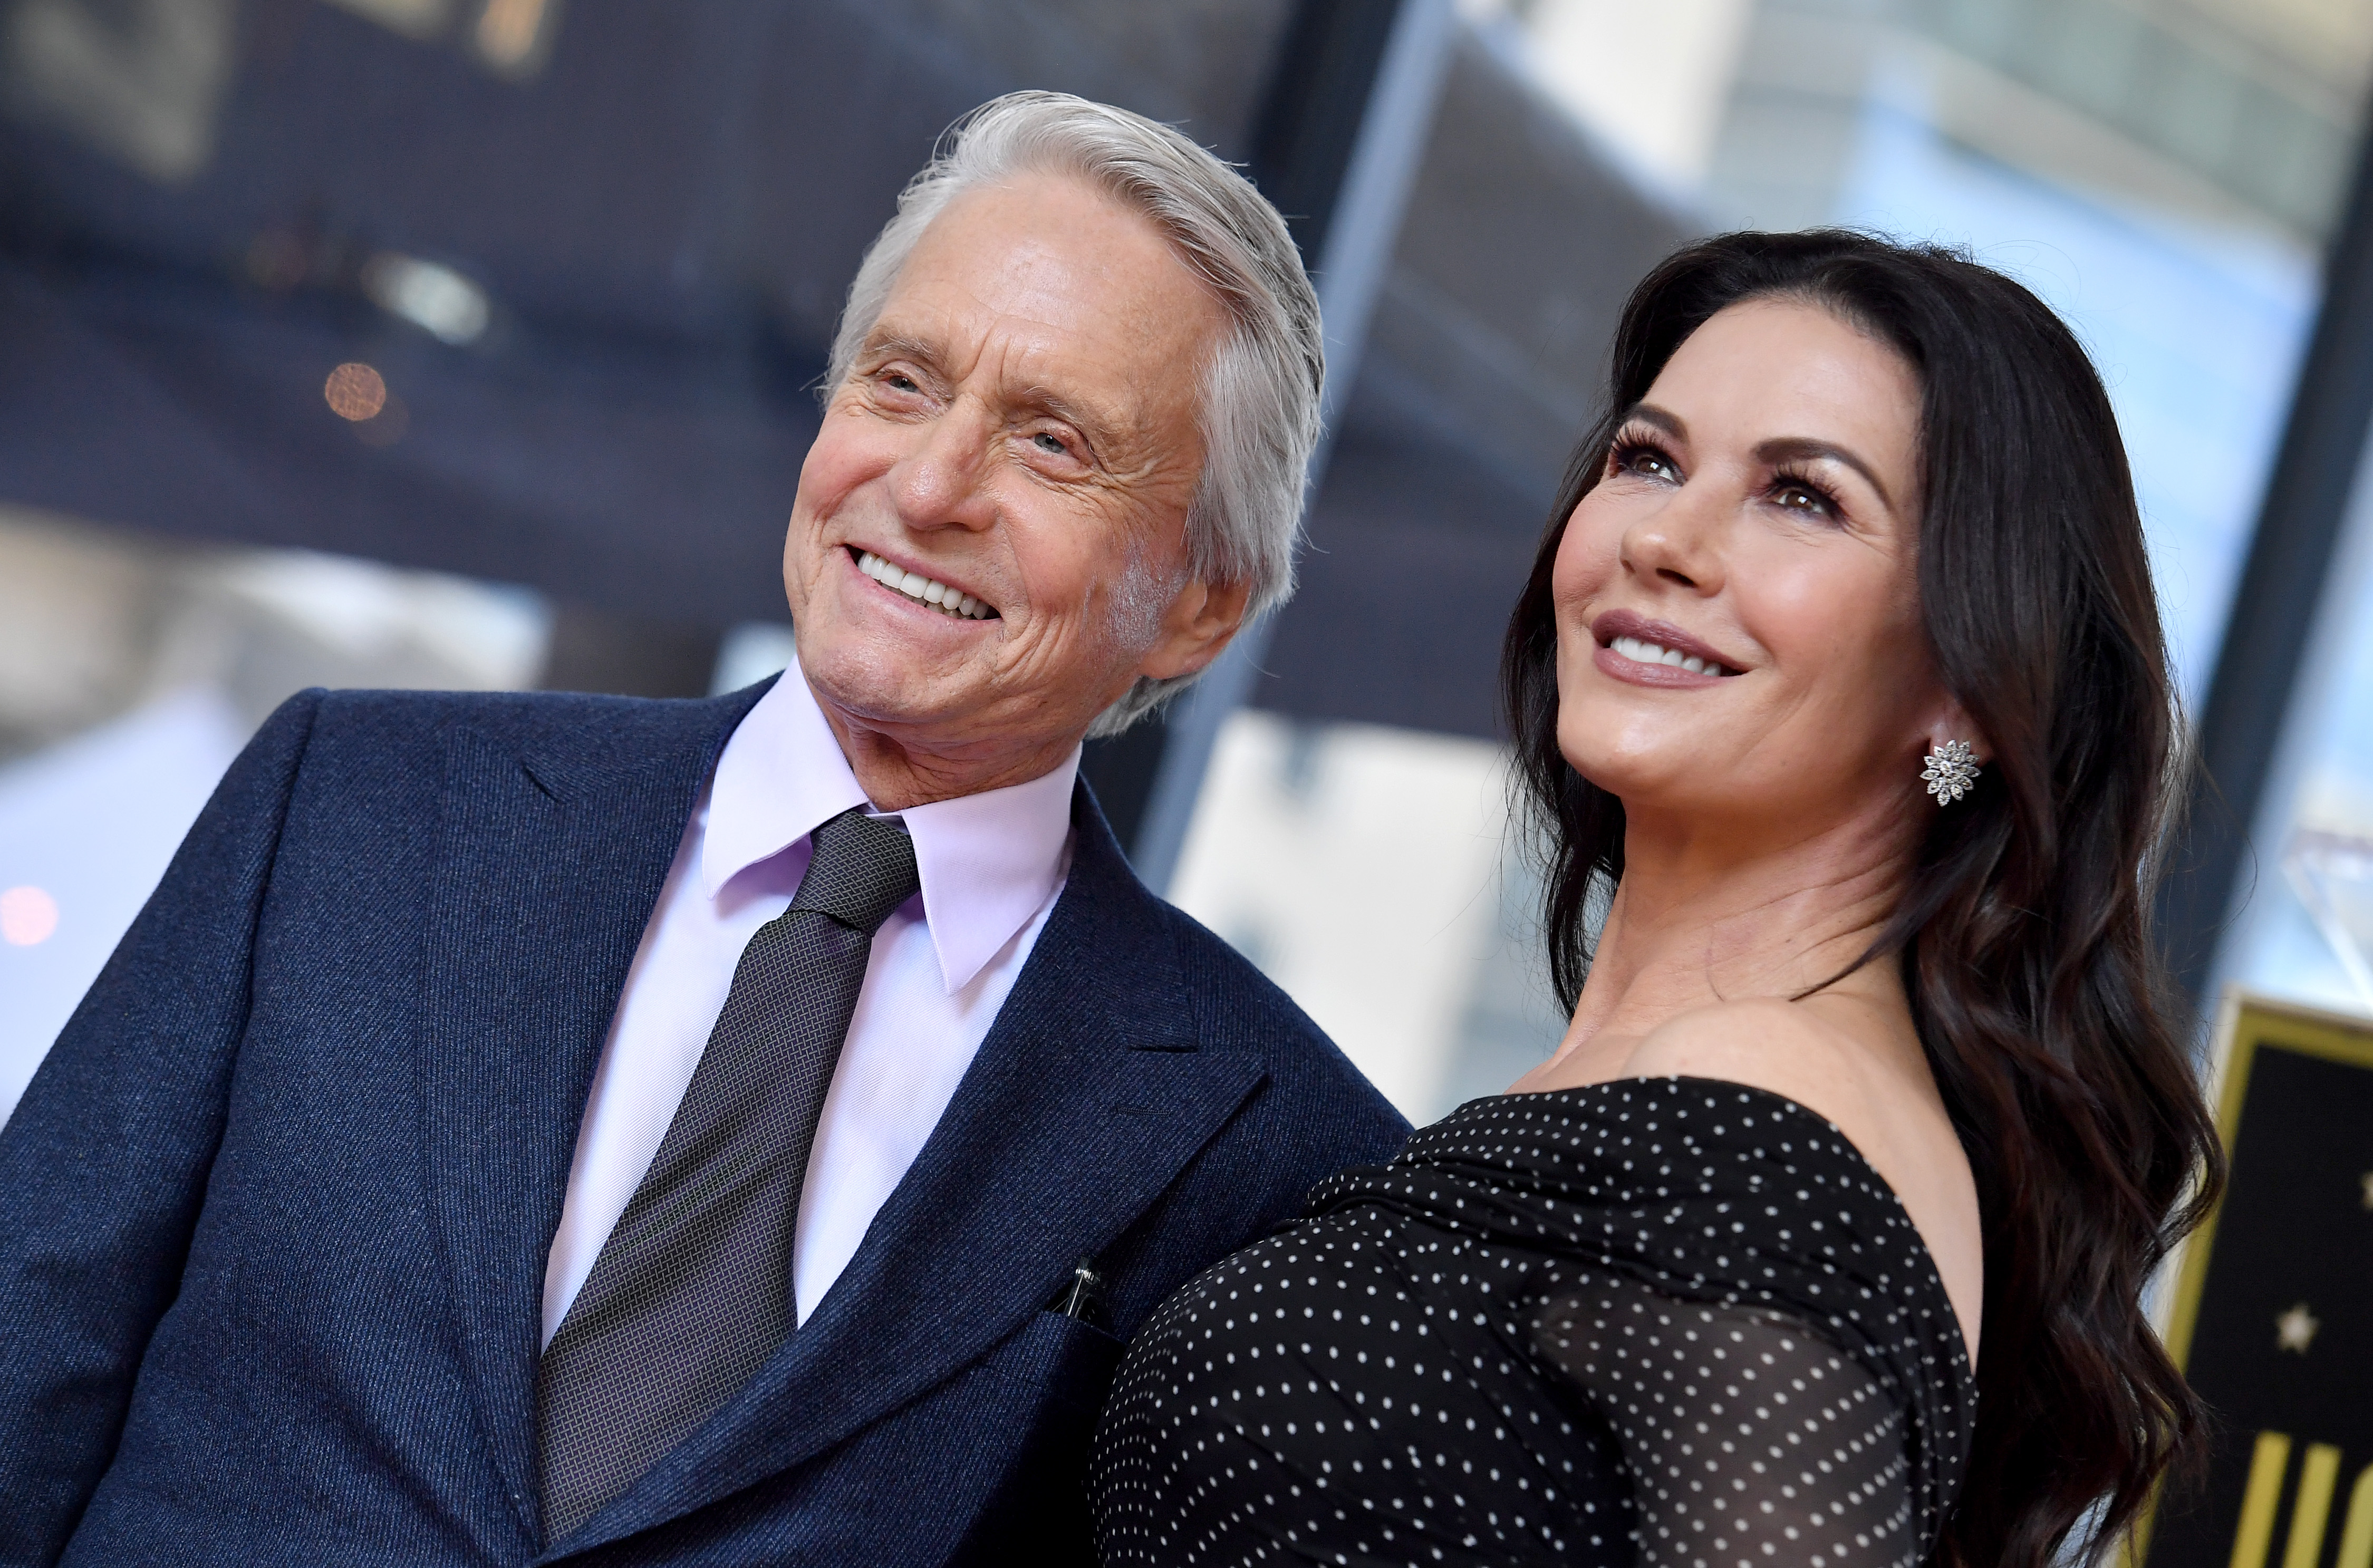 Michael Douglas and Catherine Zeta-Jones on November 06, 2018, in Hollywood, California. | Source: Getty Images